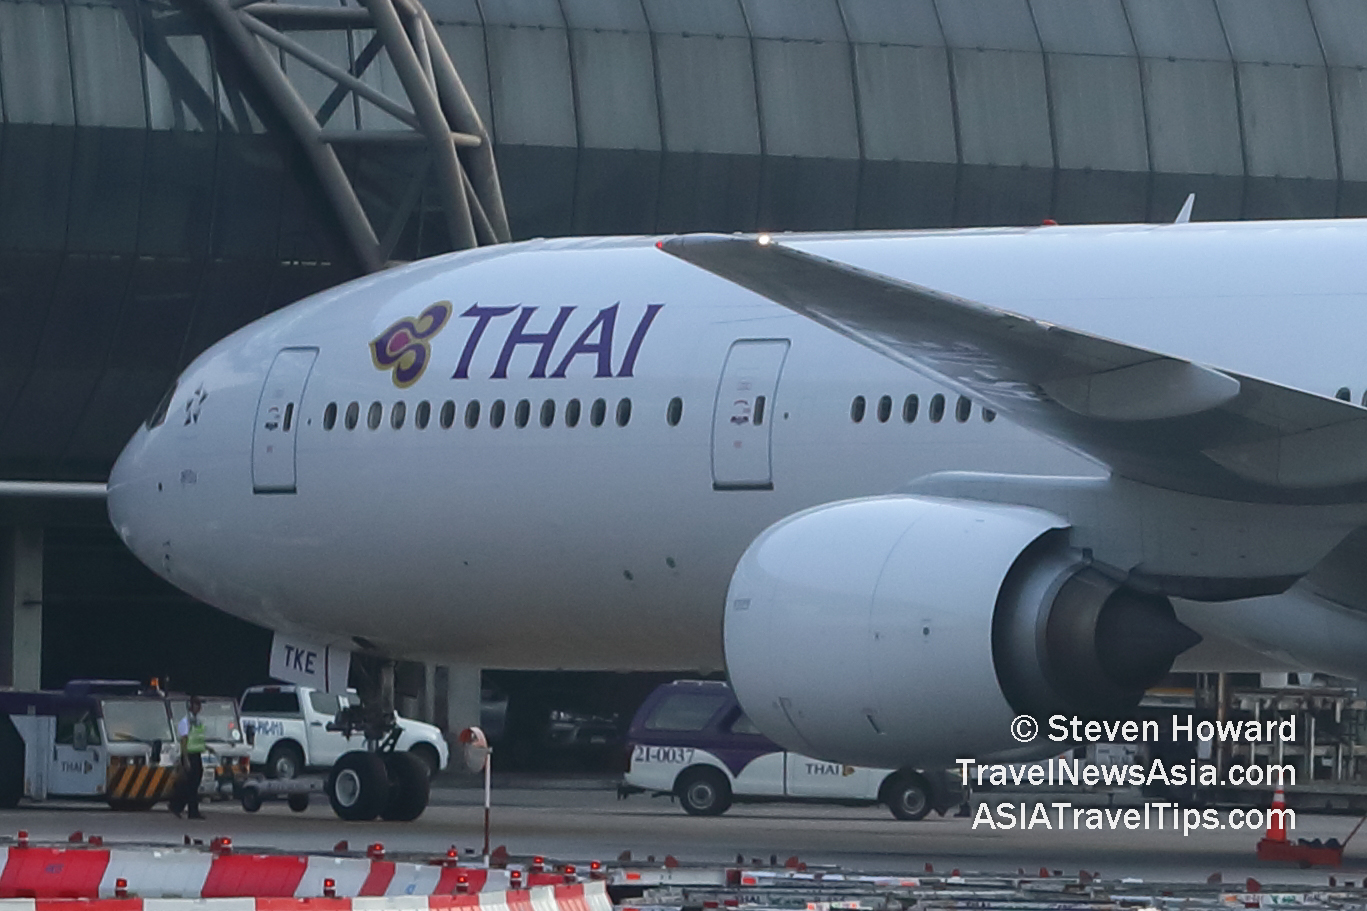 Thai Airways Boeing 777 reg: HS-TKE. Picture by Steven Howard of TravelNewsAsia.com Click to enlarge.